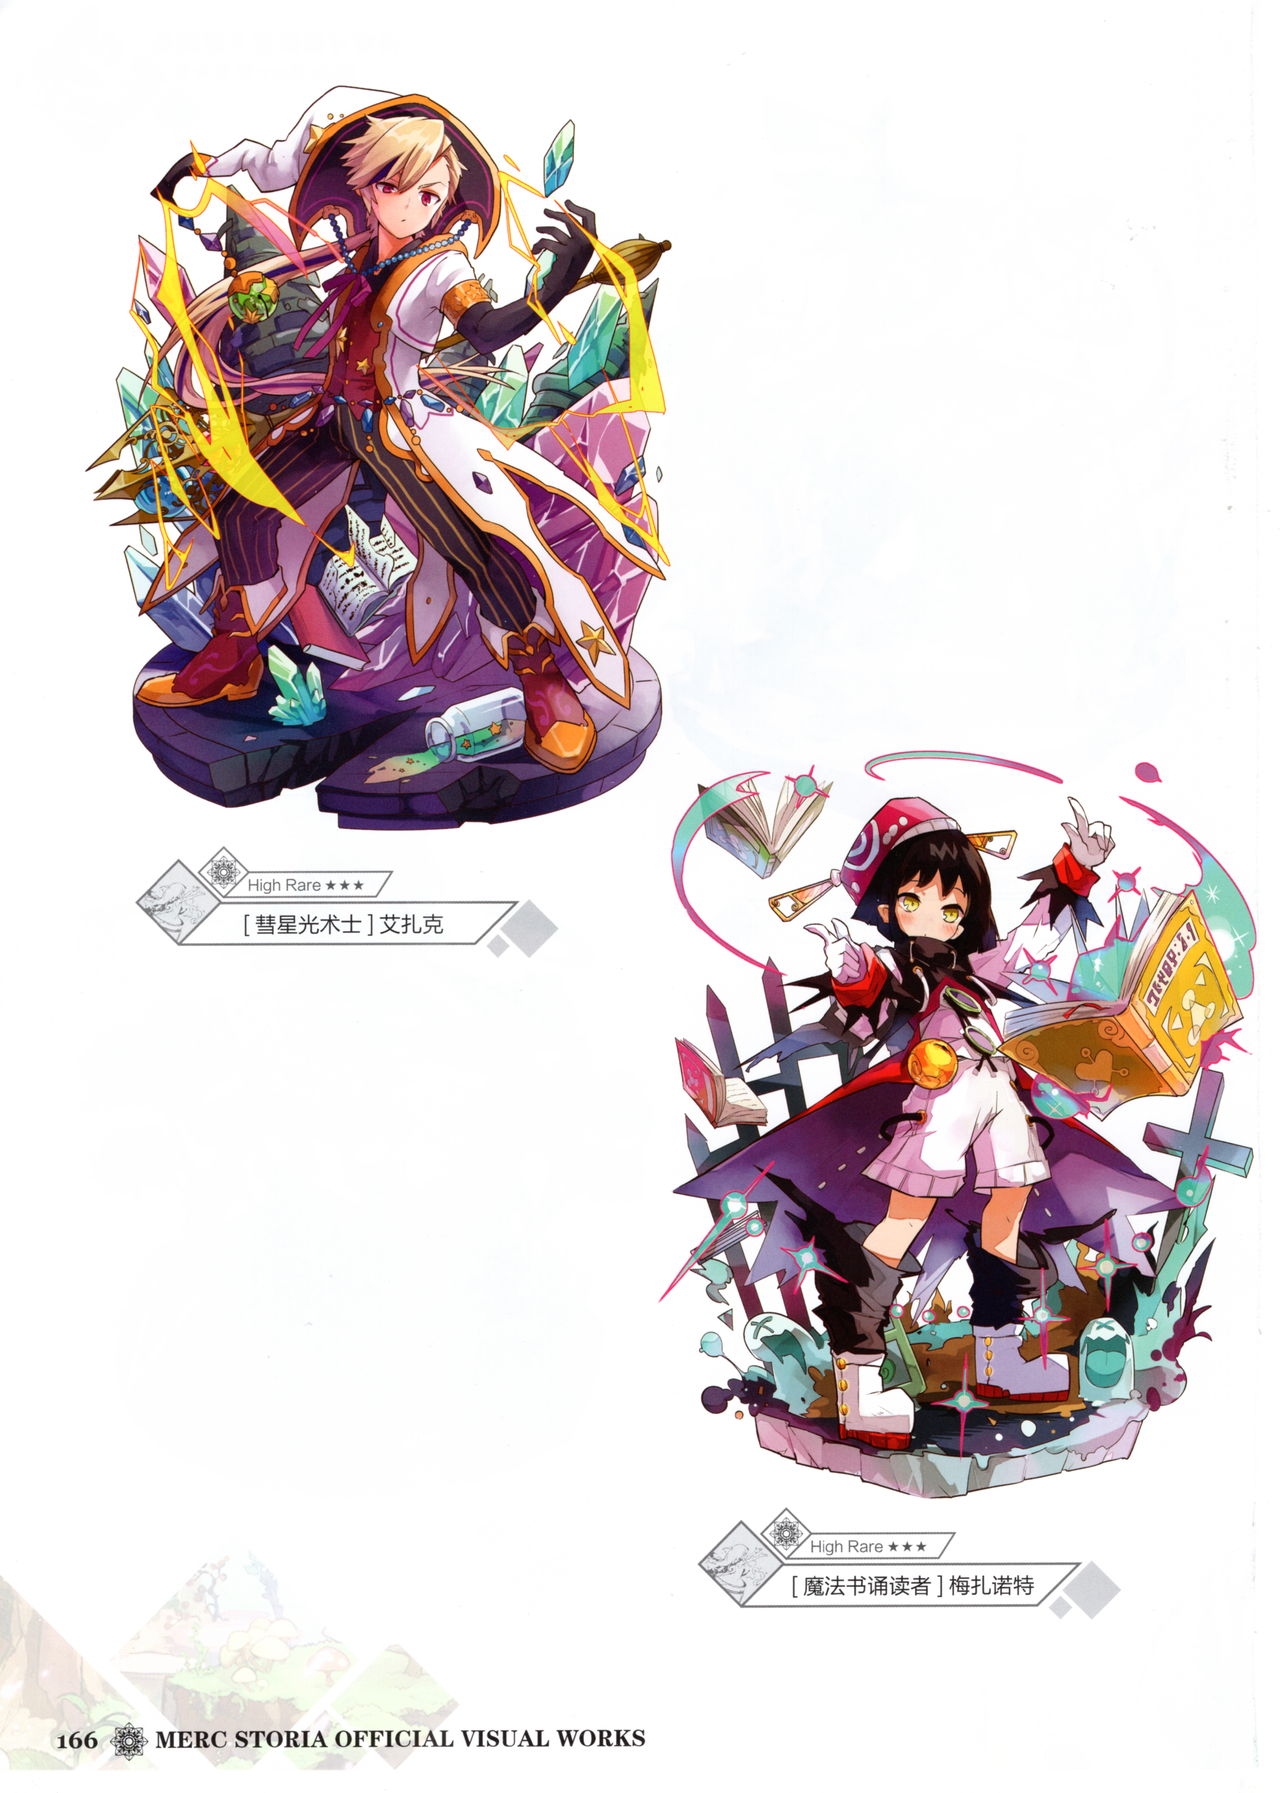 Merc Storia Official Visual Works [Chinese] 168